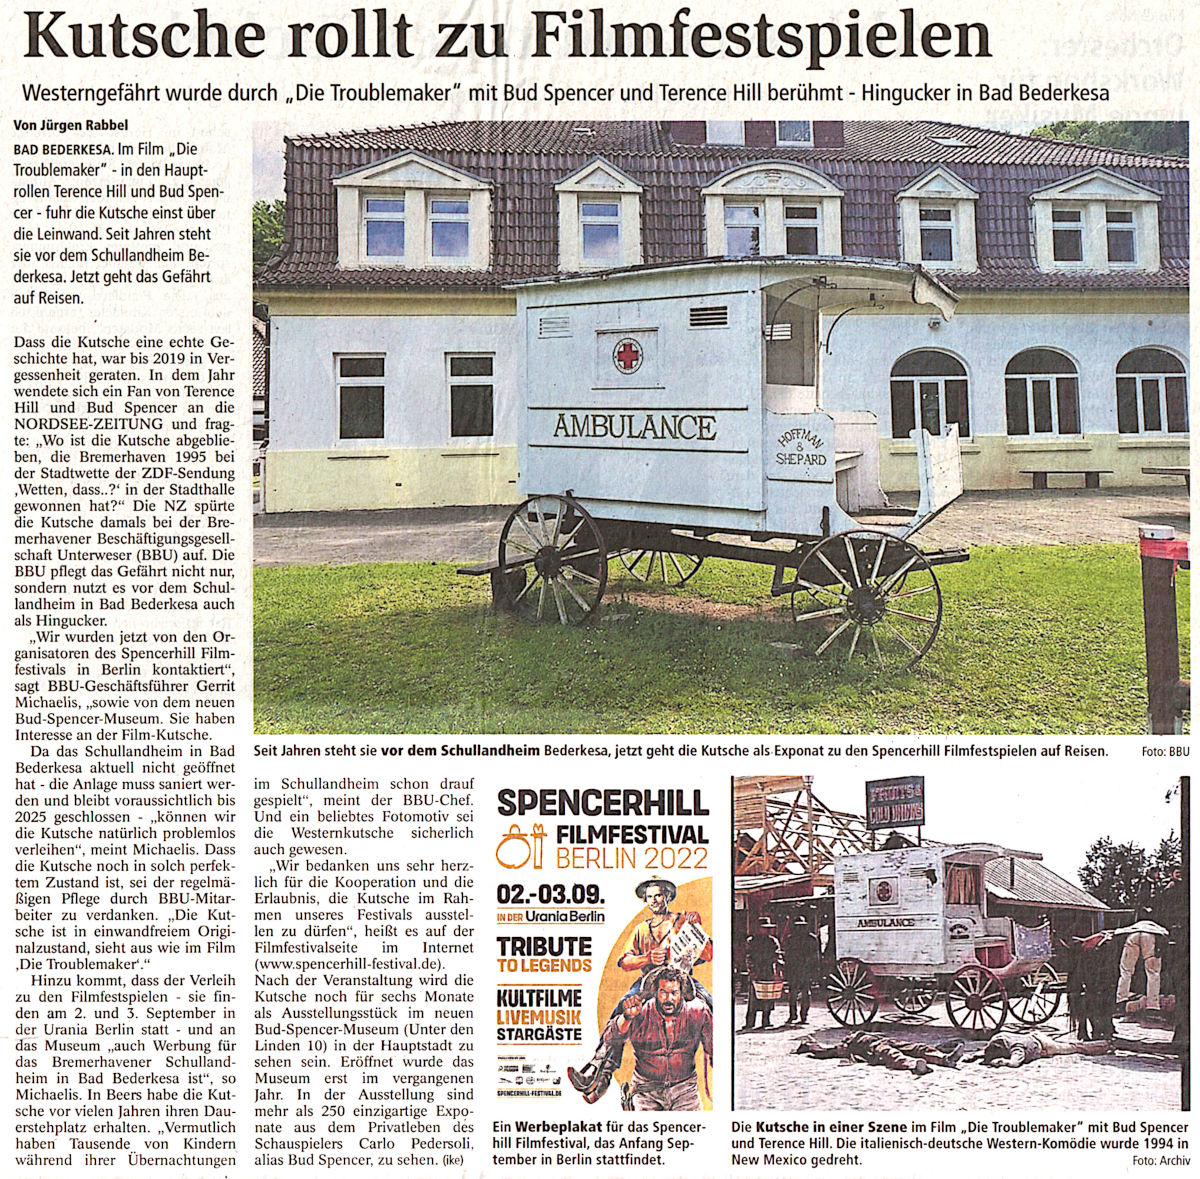 Article from the Nordsee-Zeitung of 8. August 2022